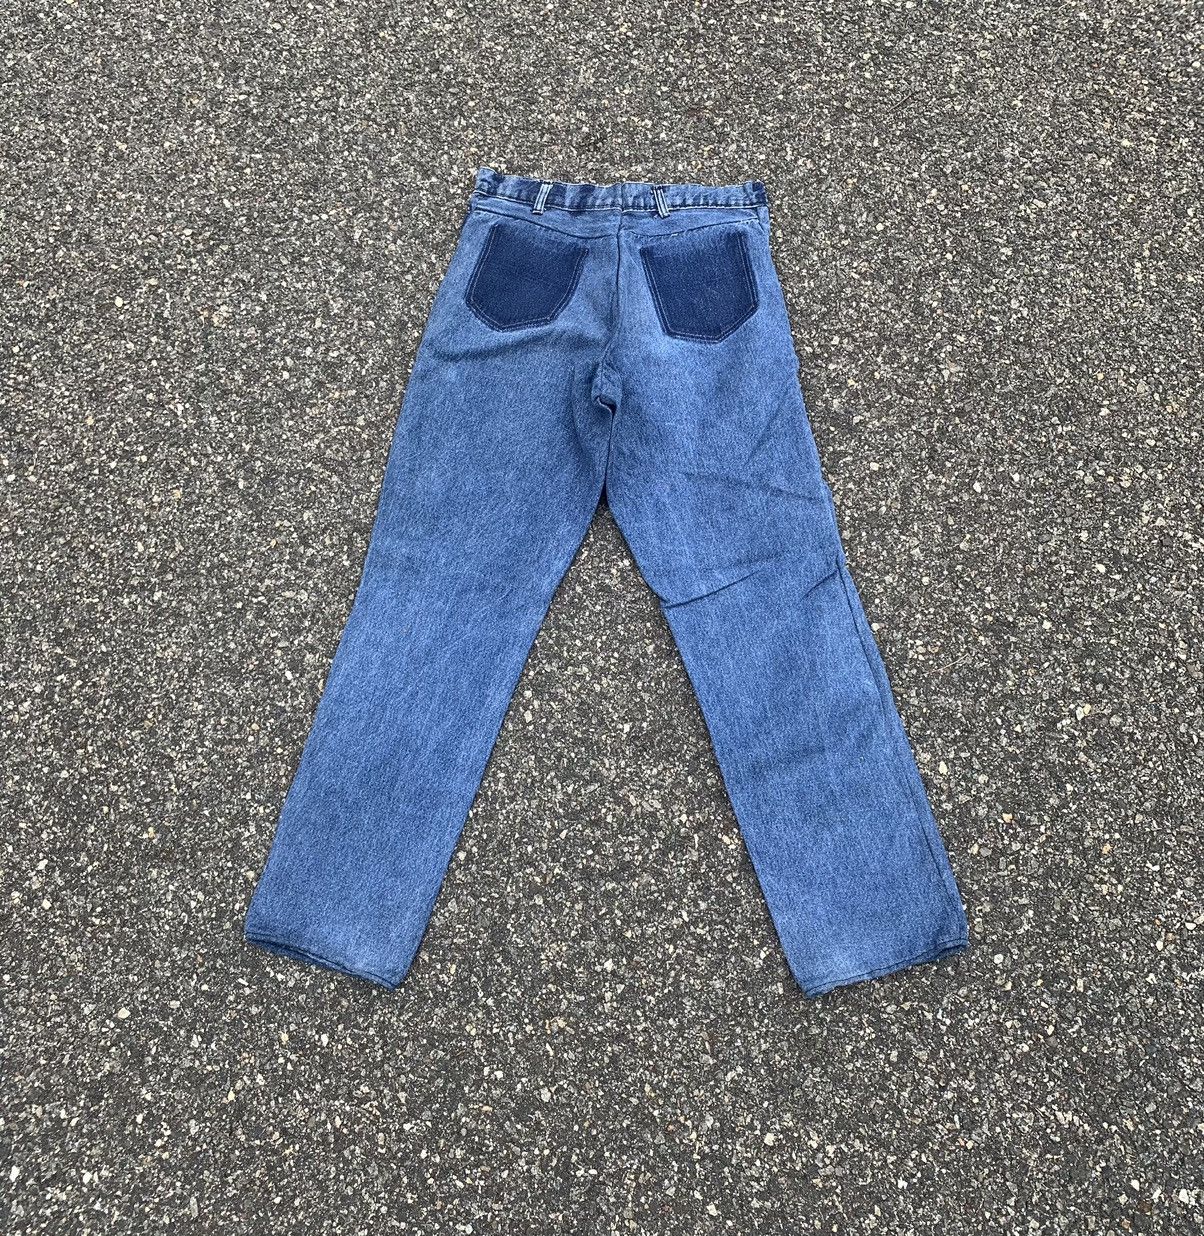 Hype no pocket blue jeans 36x31 relaxed fit Size US 36 / EU 52 - 2 Preview